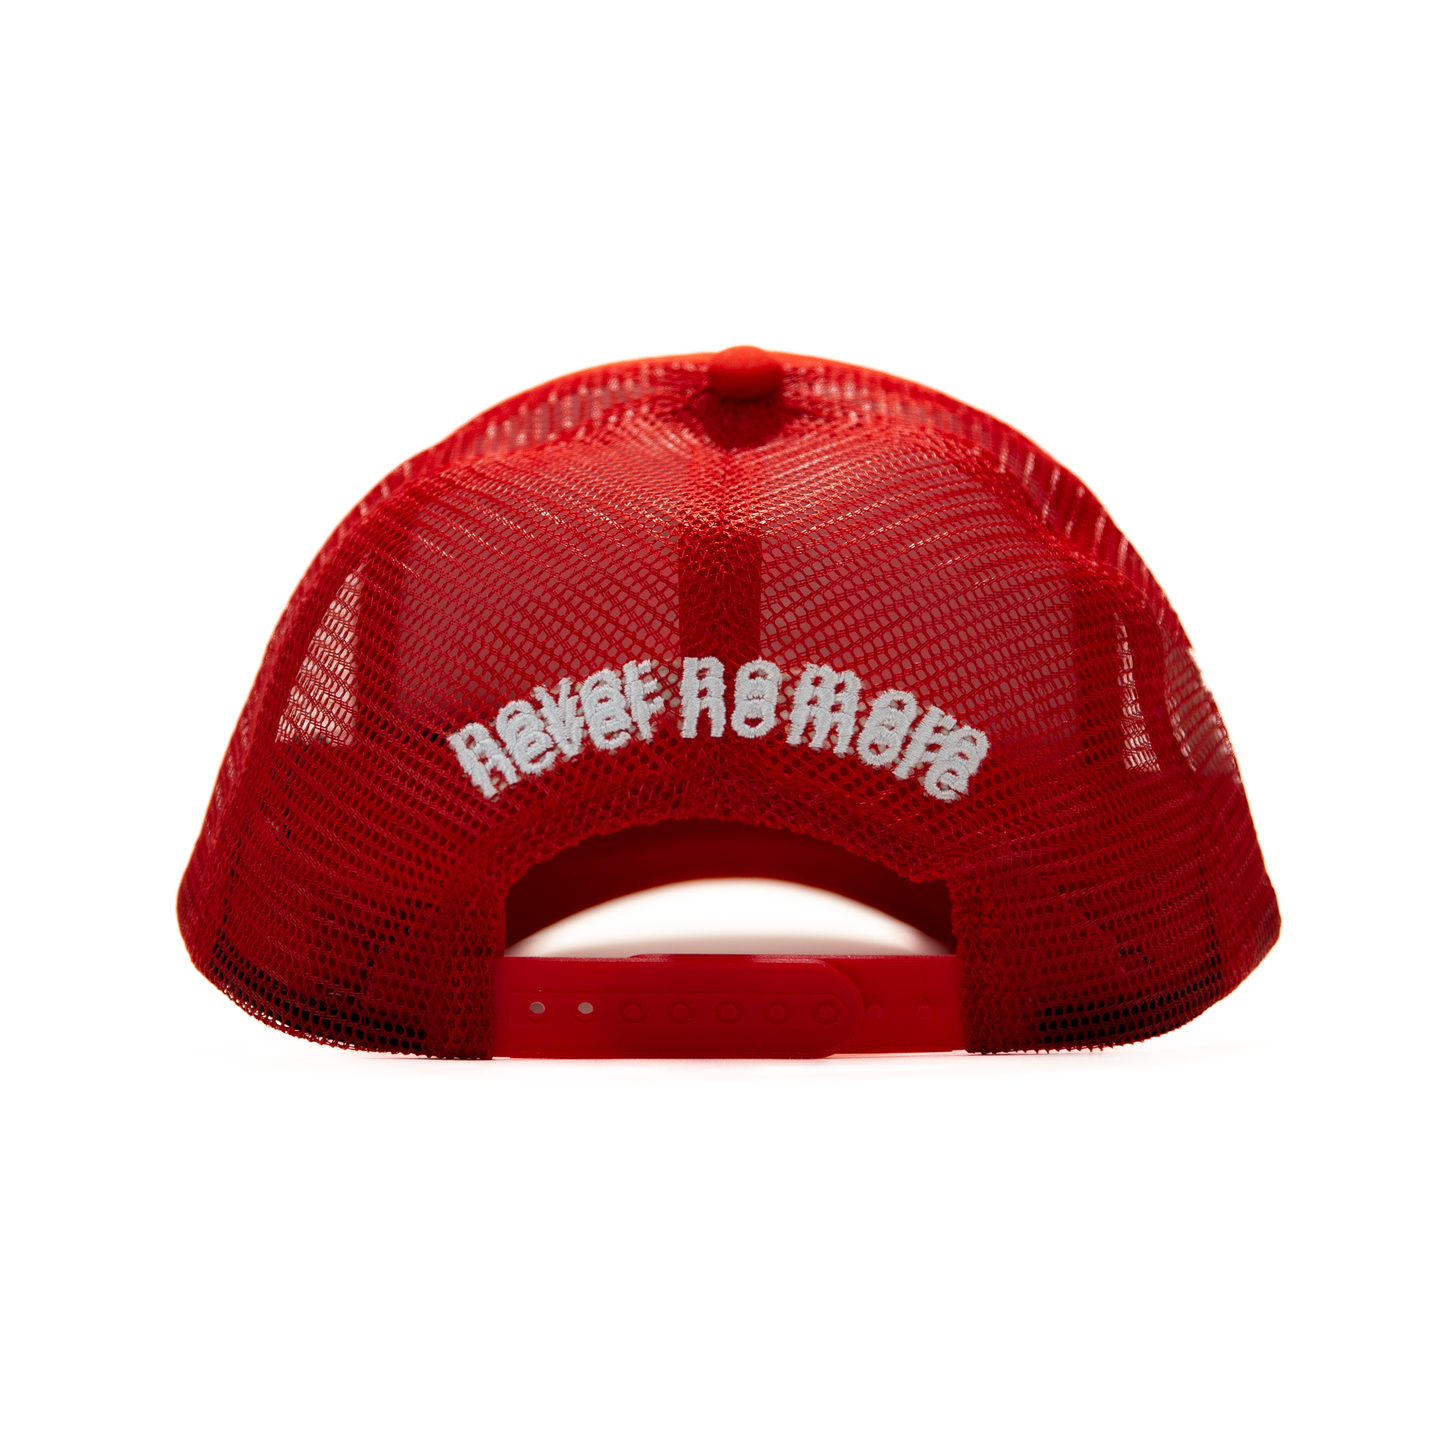 Flying Duck Trucker Hat, Red / White - Layr Official